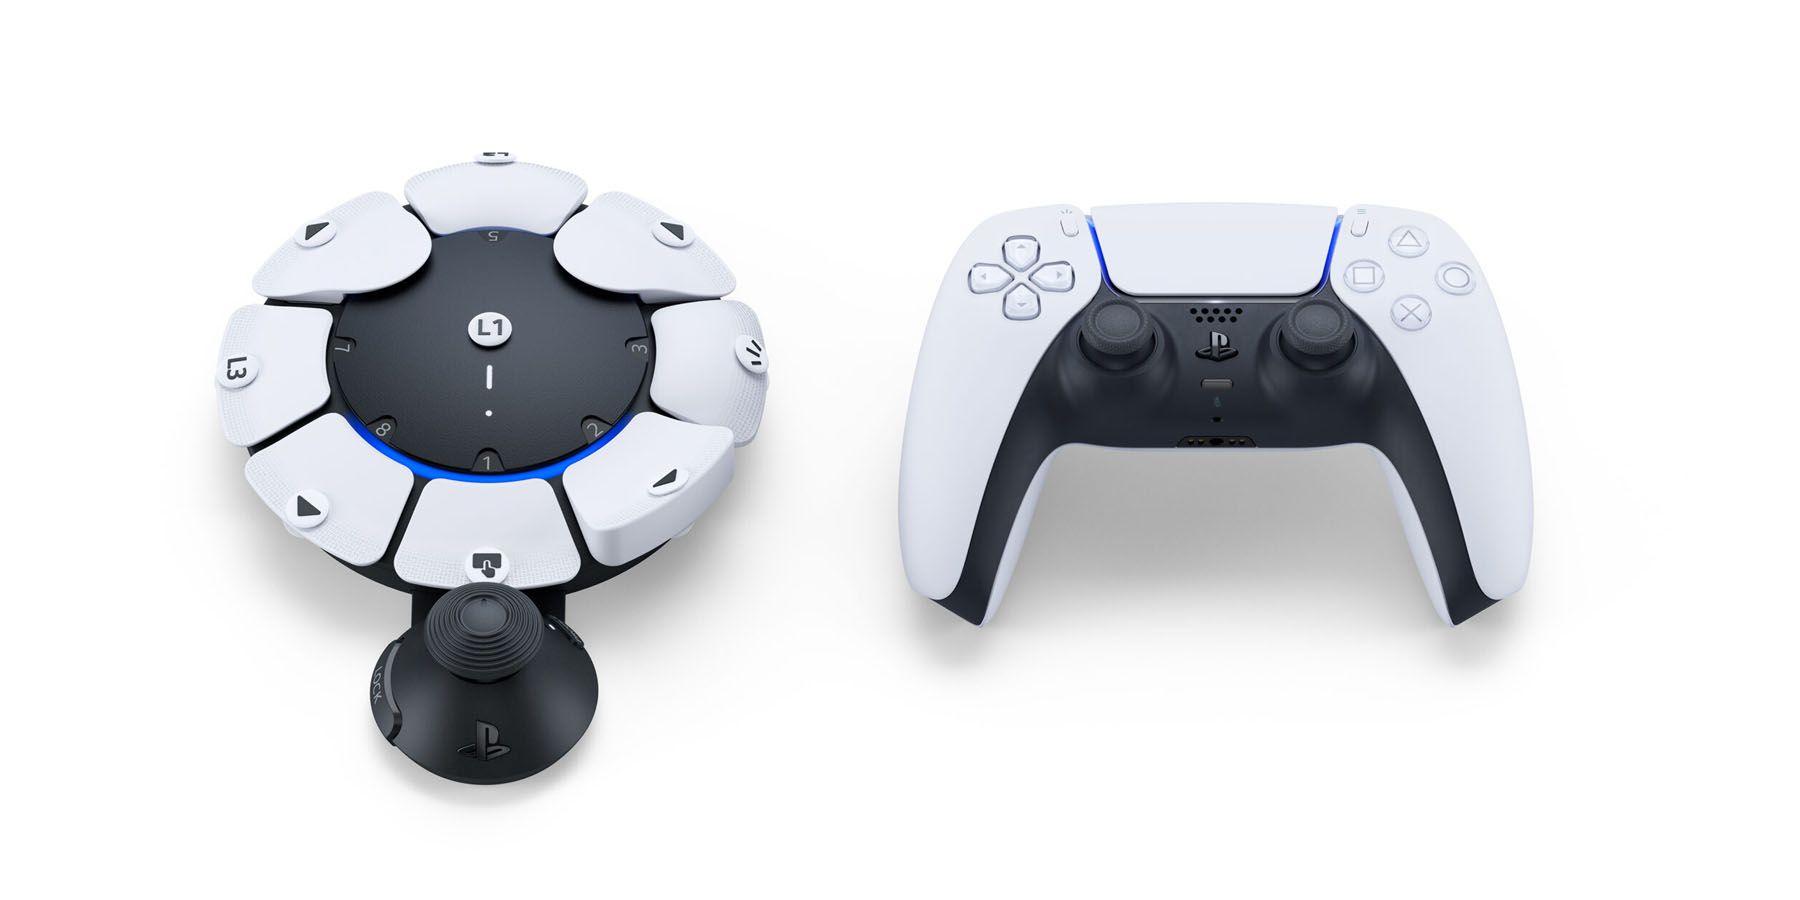 A promotional image of the PlayStation 5 Access Controller next to DualSense.